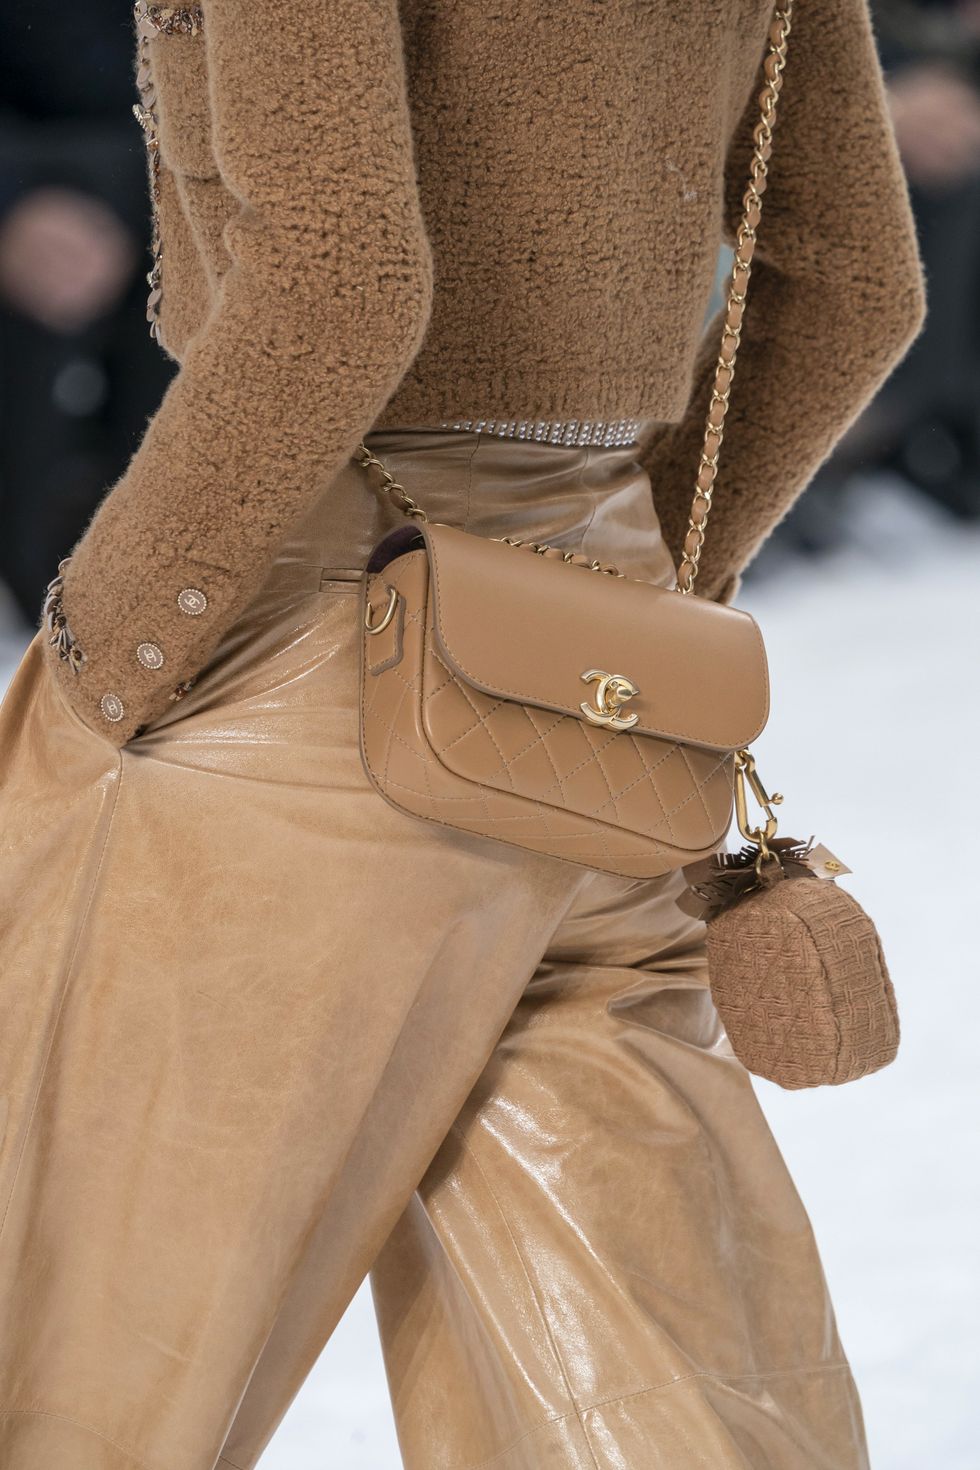 100 bags we already want from the AW19 catwalks – Autumn/winter 2019 bag  trends